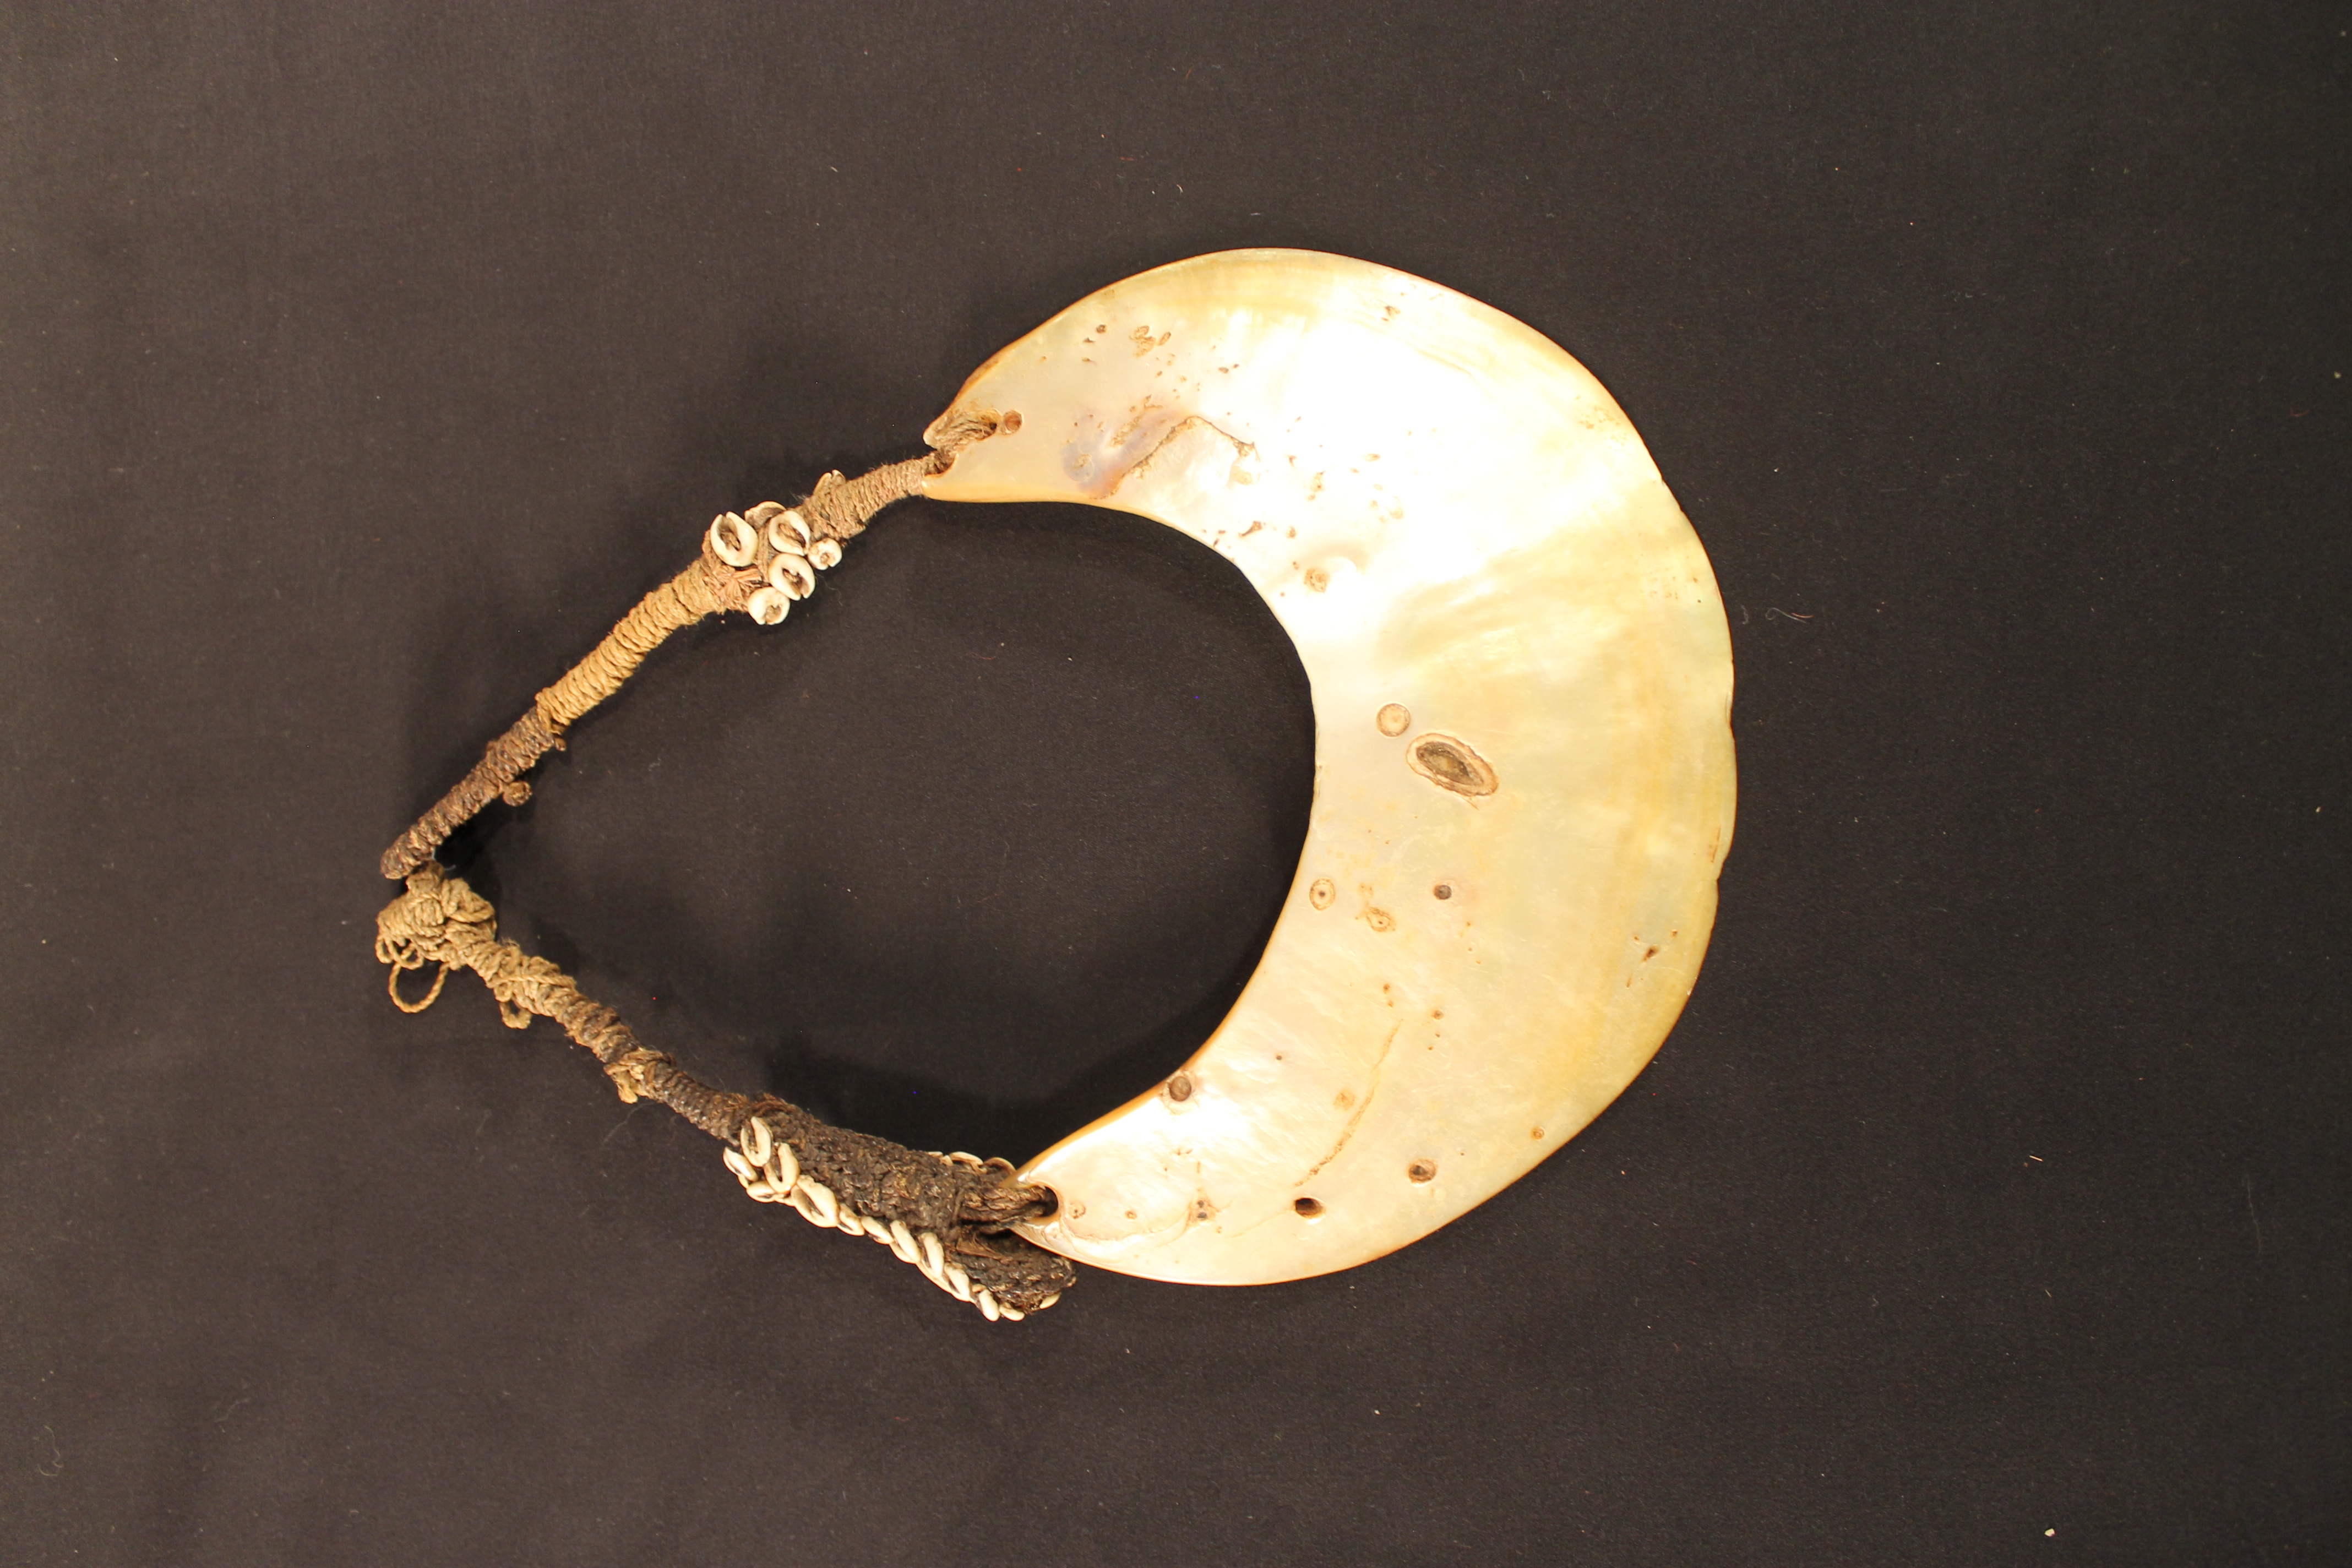 Large half-moon-shaped shell with attached woven bast string and vegetal fibers. 